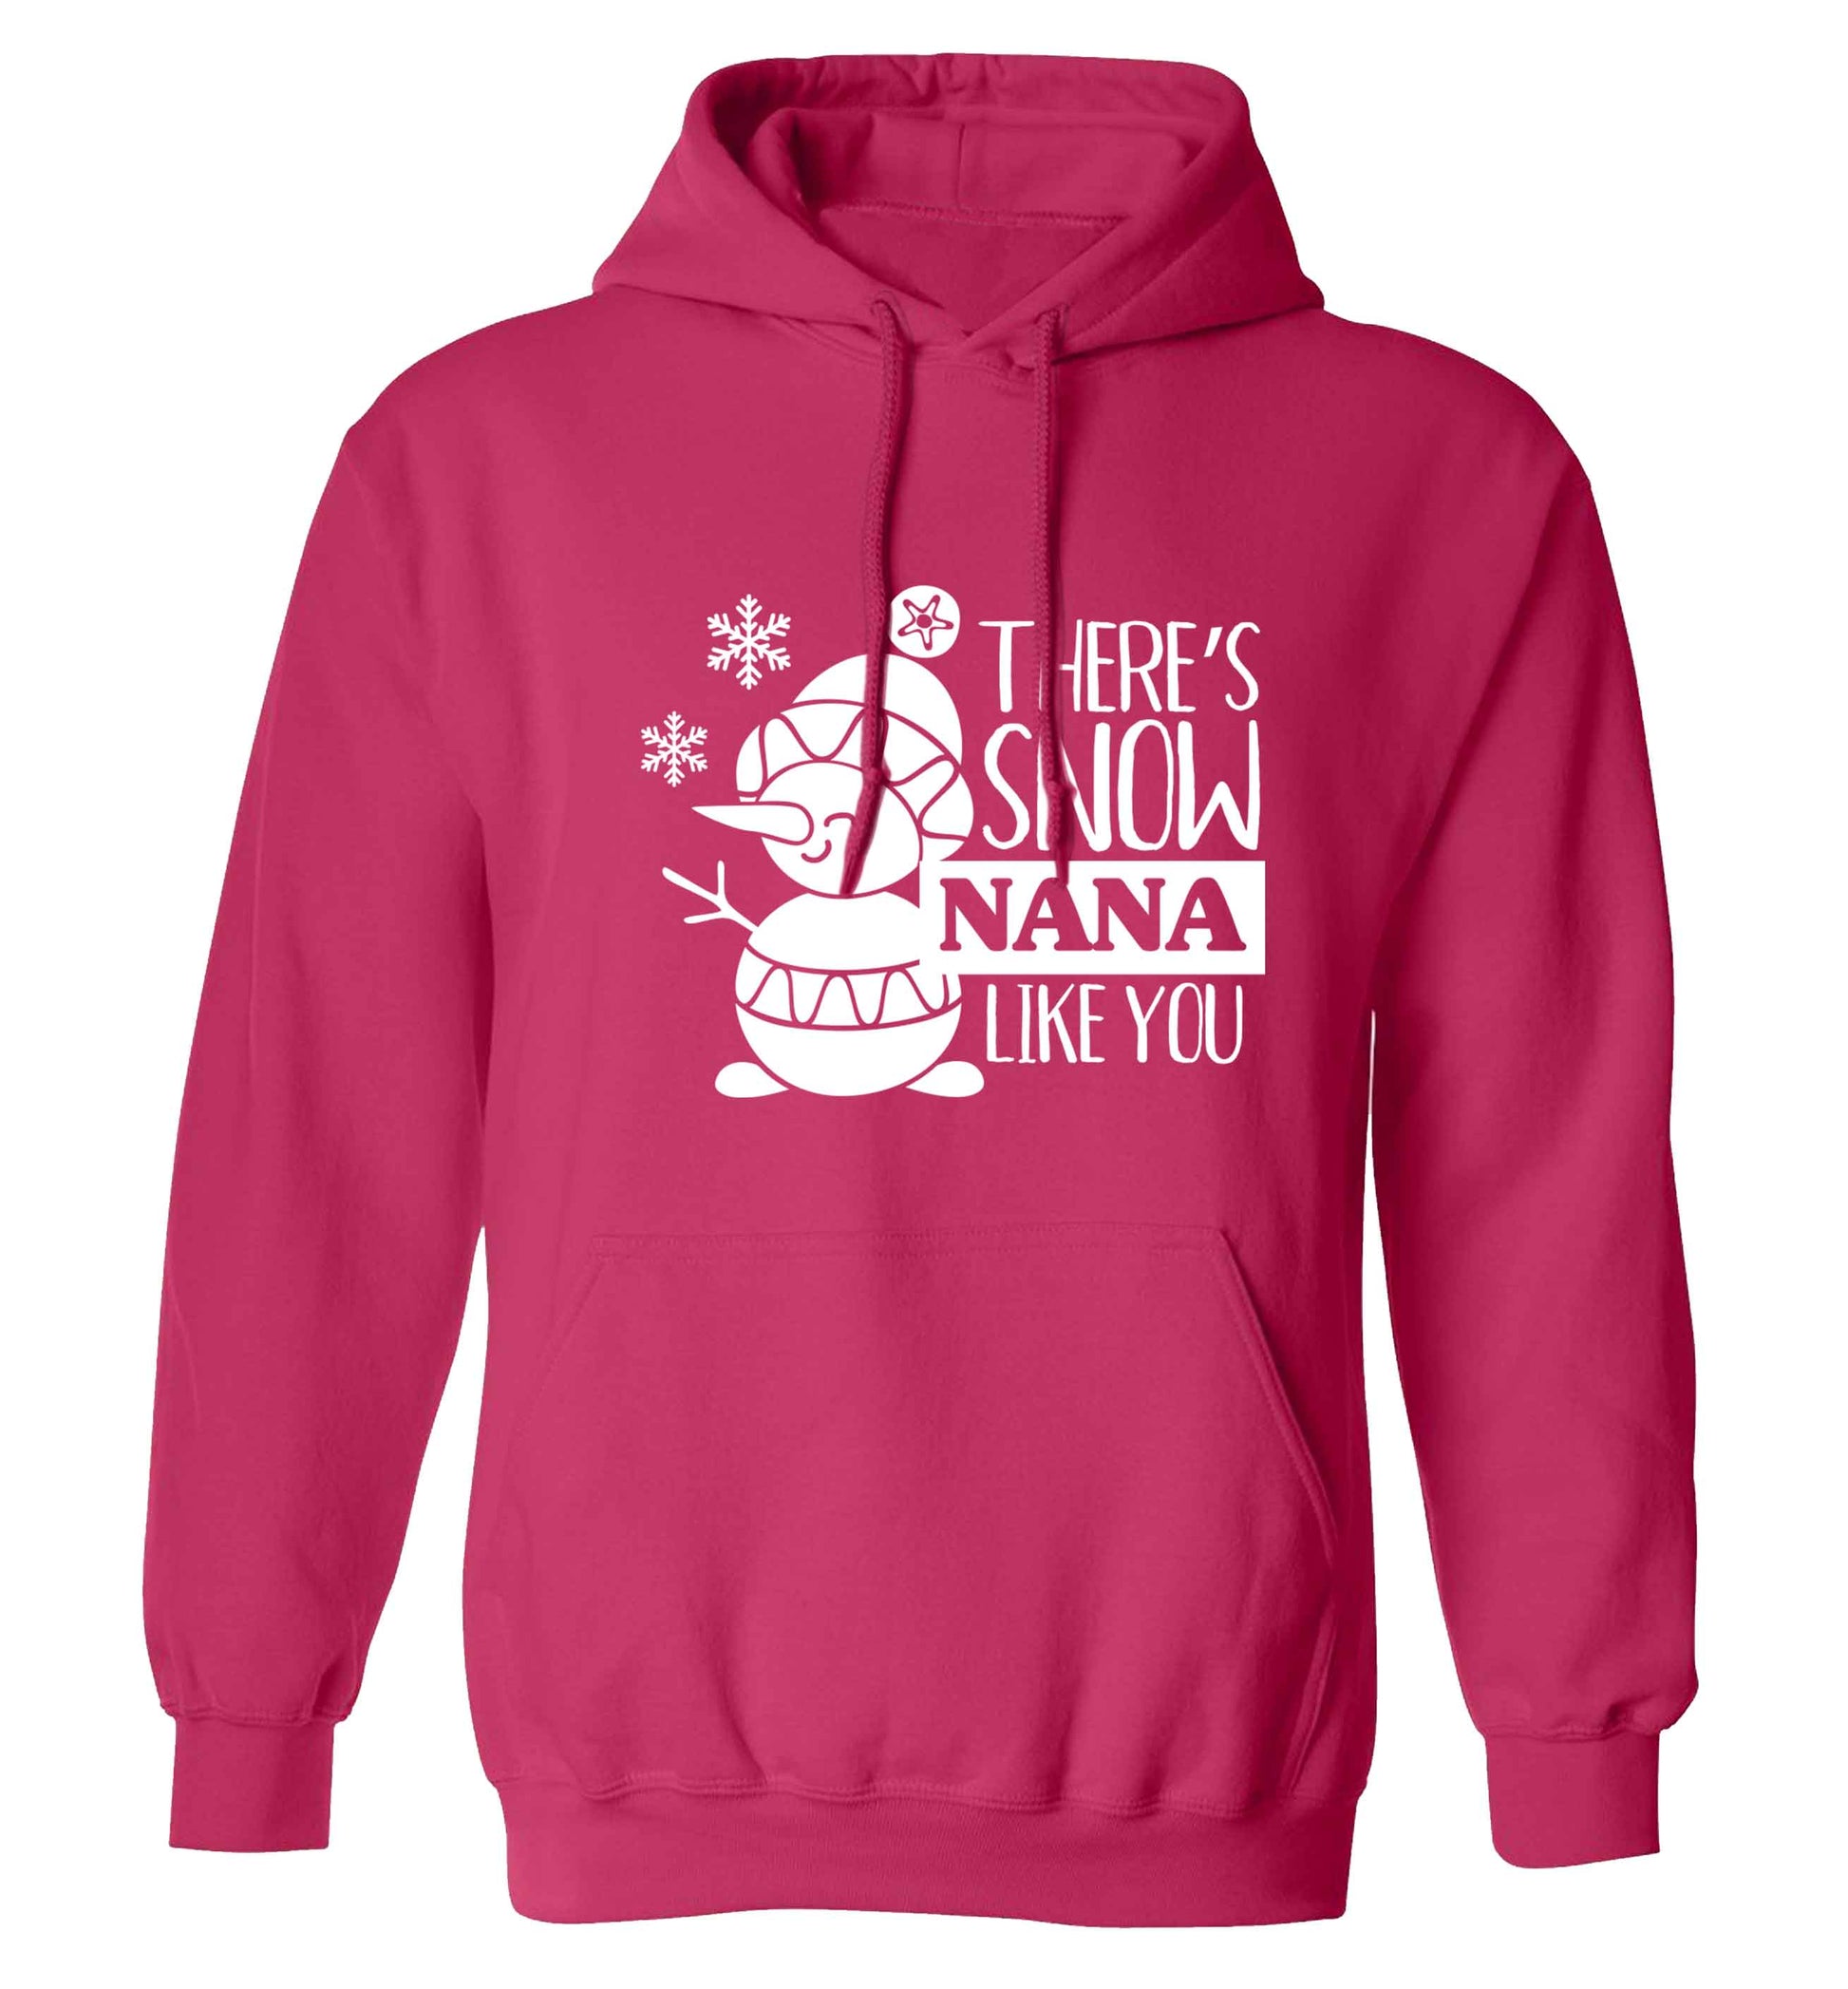 There's snow nana like you adults unisex pink hoodie 2XL